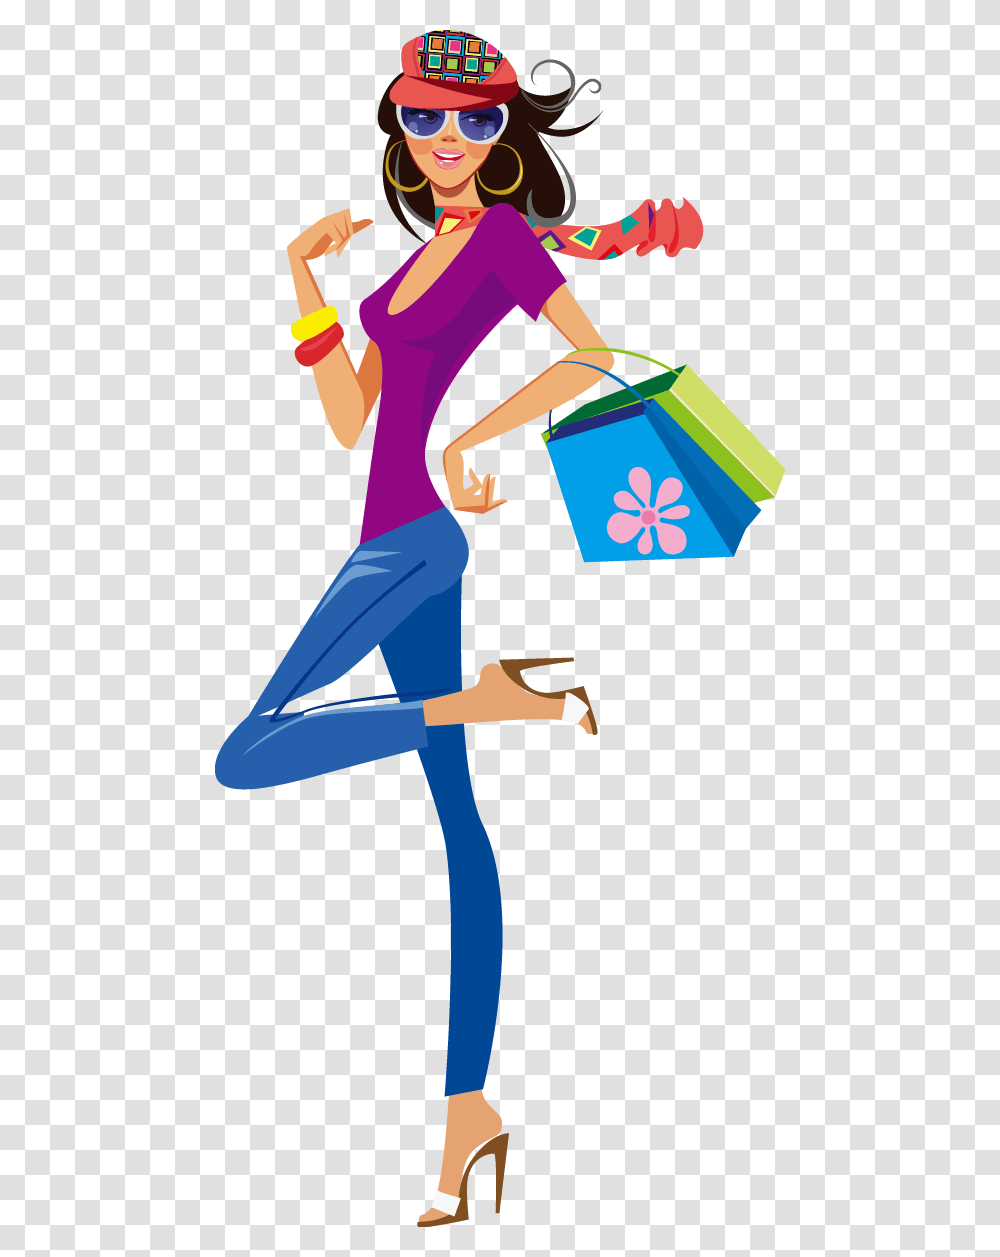 Fashion Girl Silhouette At Getdrawings Fashion Shopping Girl, Person, Human, Sunglasses, Accessories Transparent Png